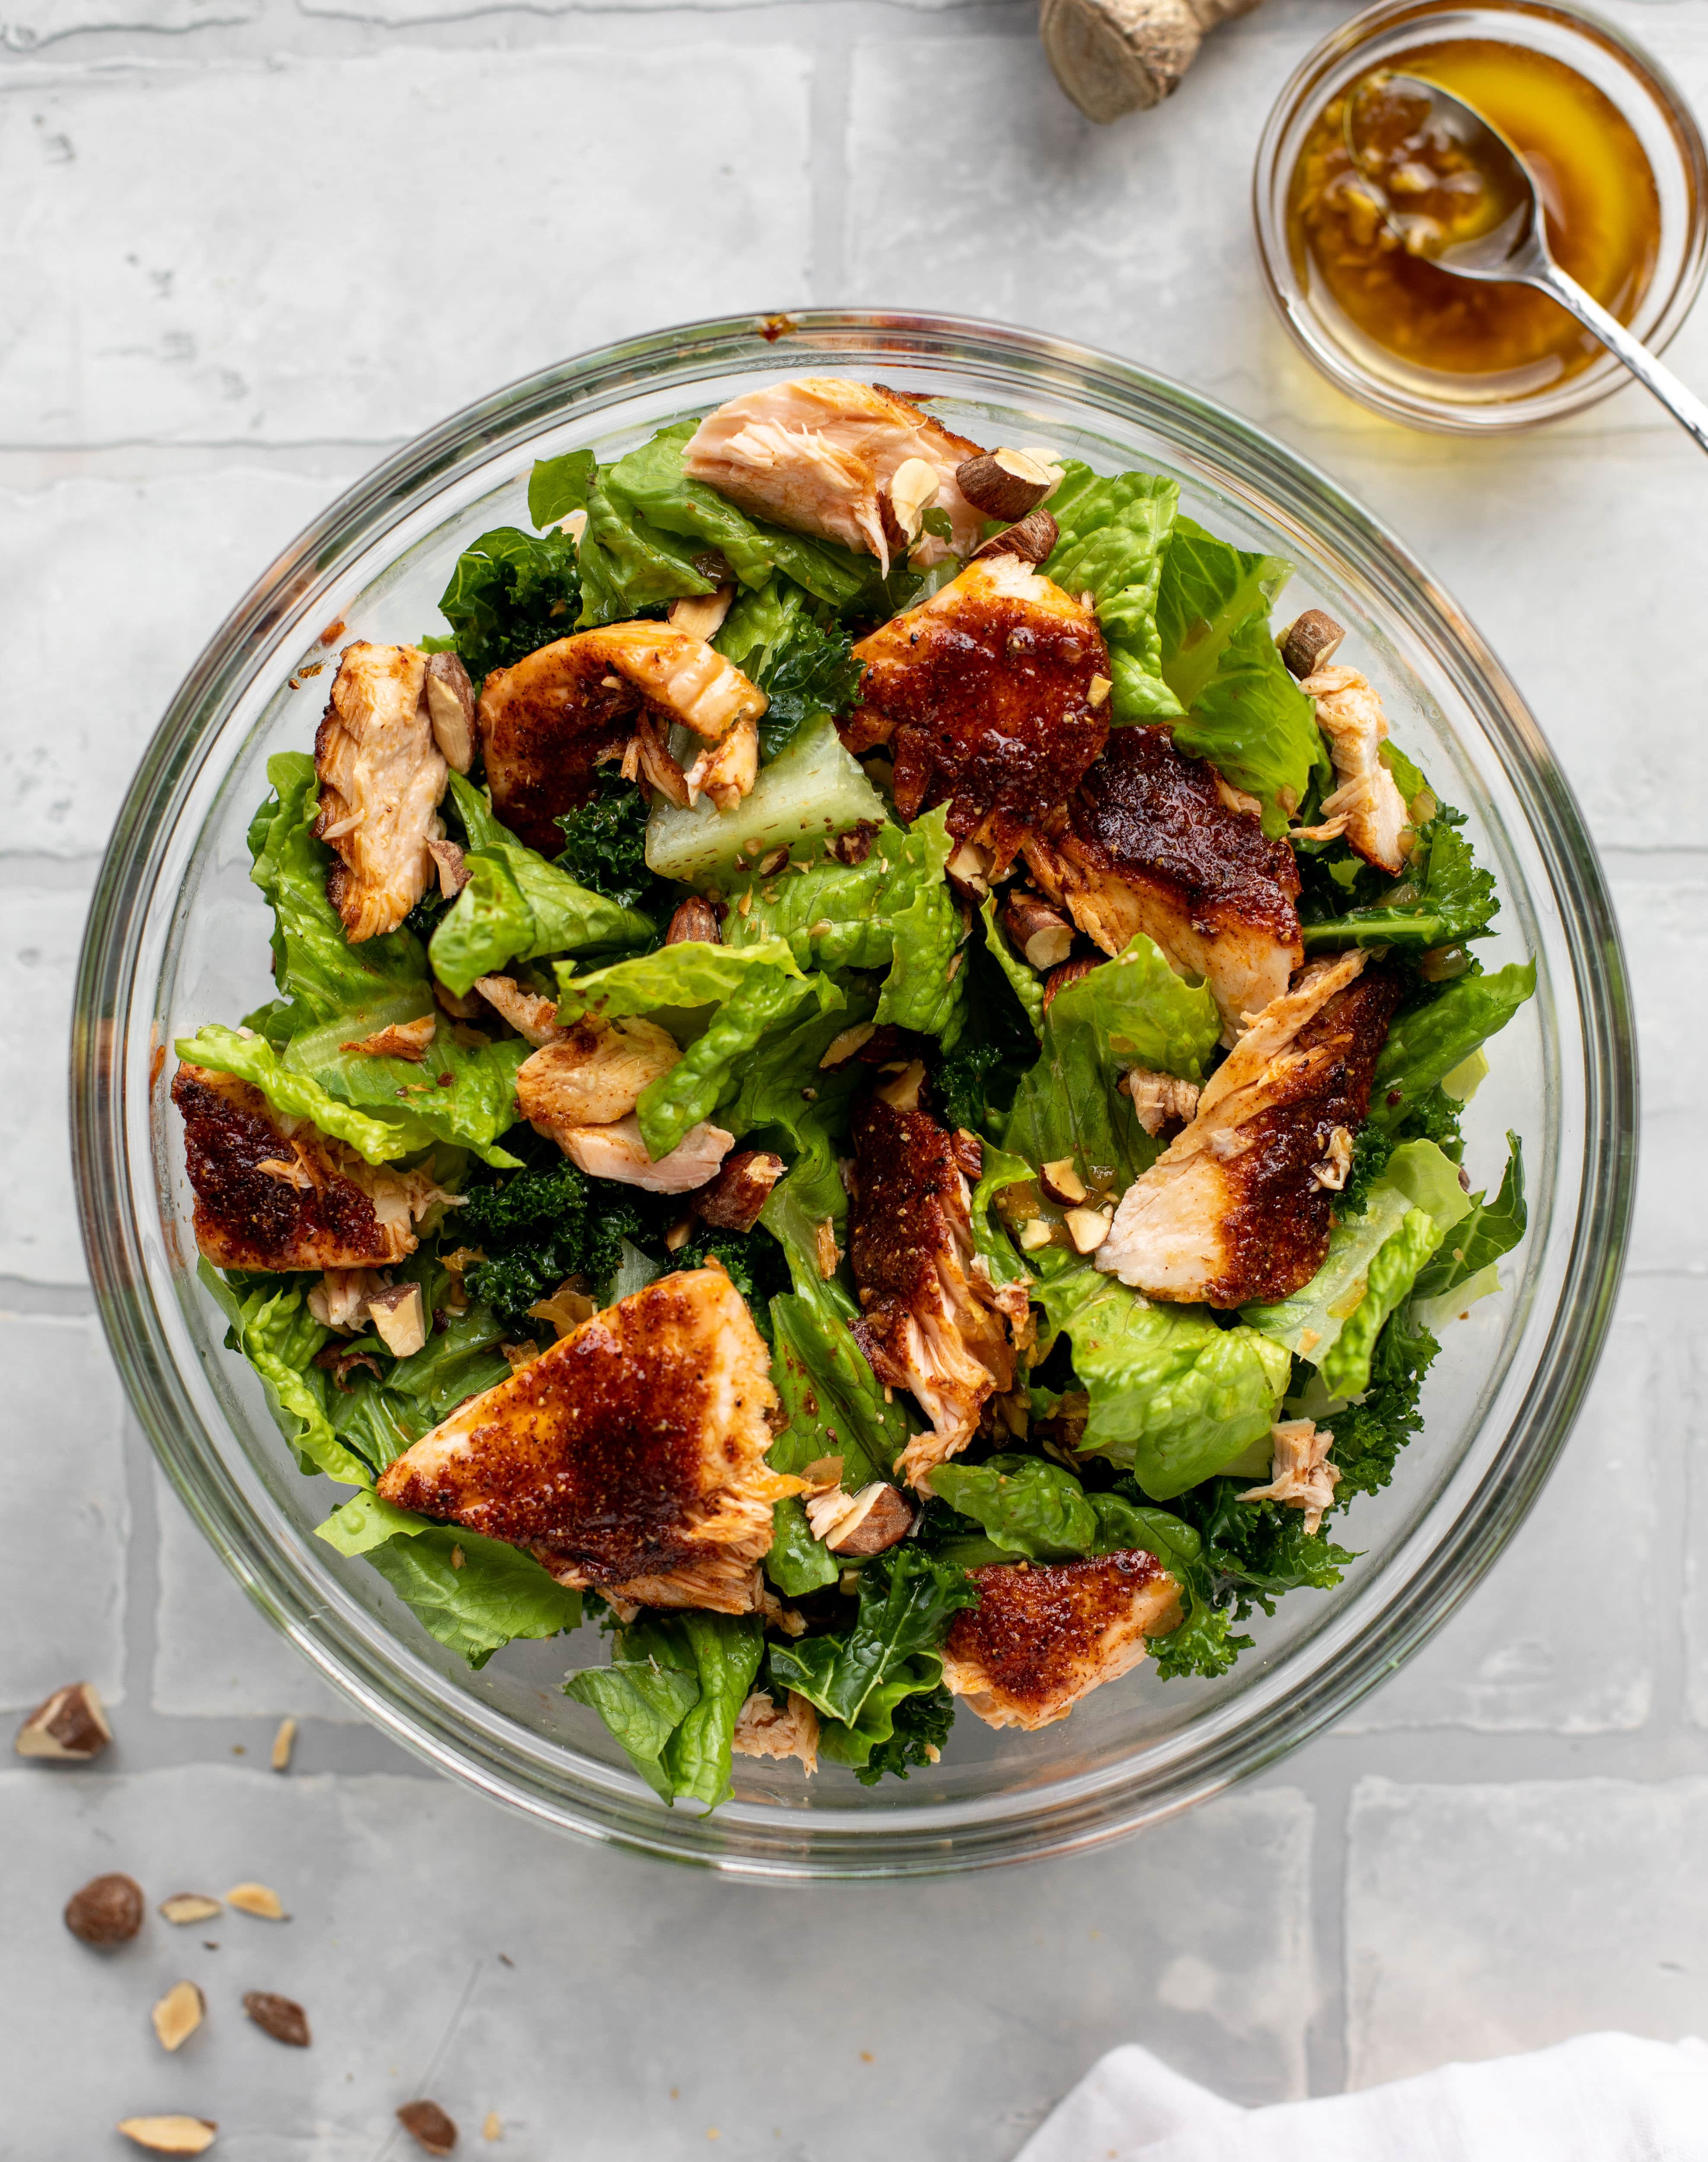 This ginger salmon salad has the flaky, flavorful roasted salmon on top of kale and romaine, drizzled with warm ginger vinaigrette. 